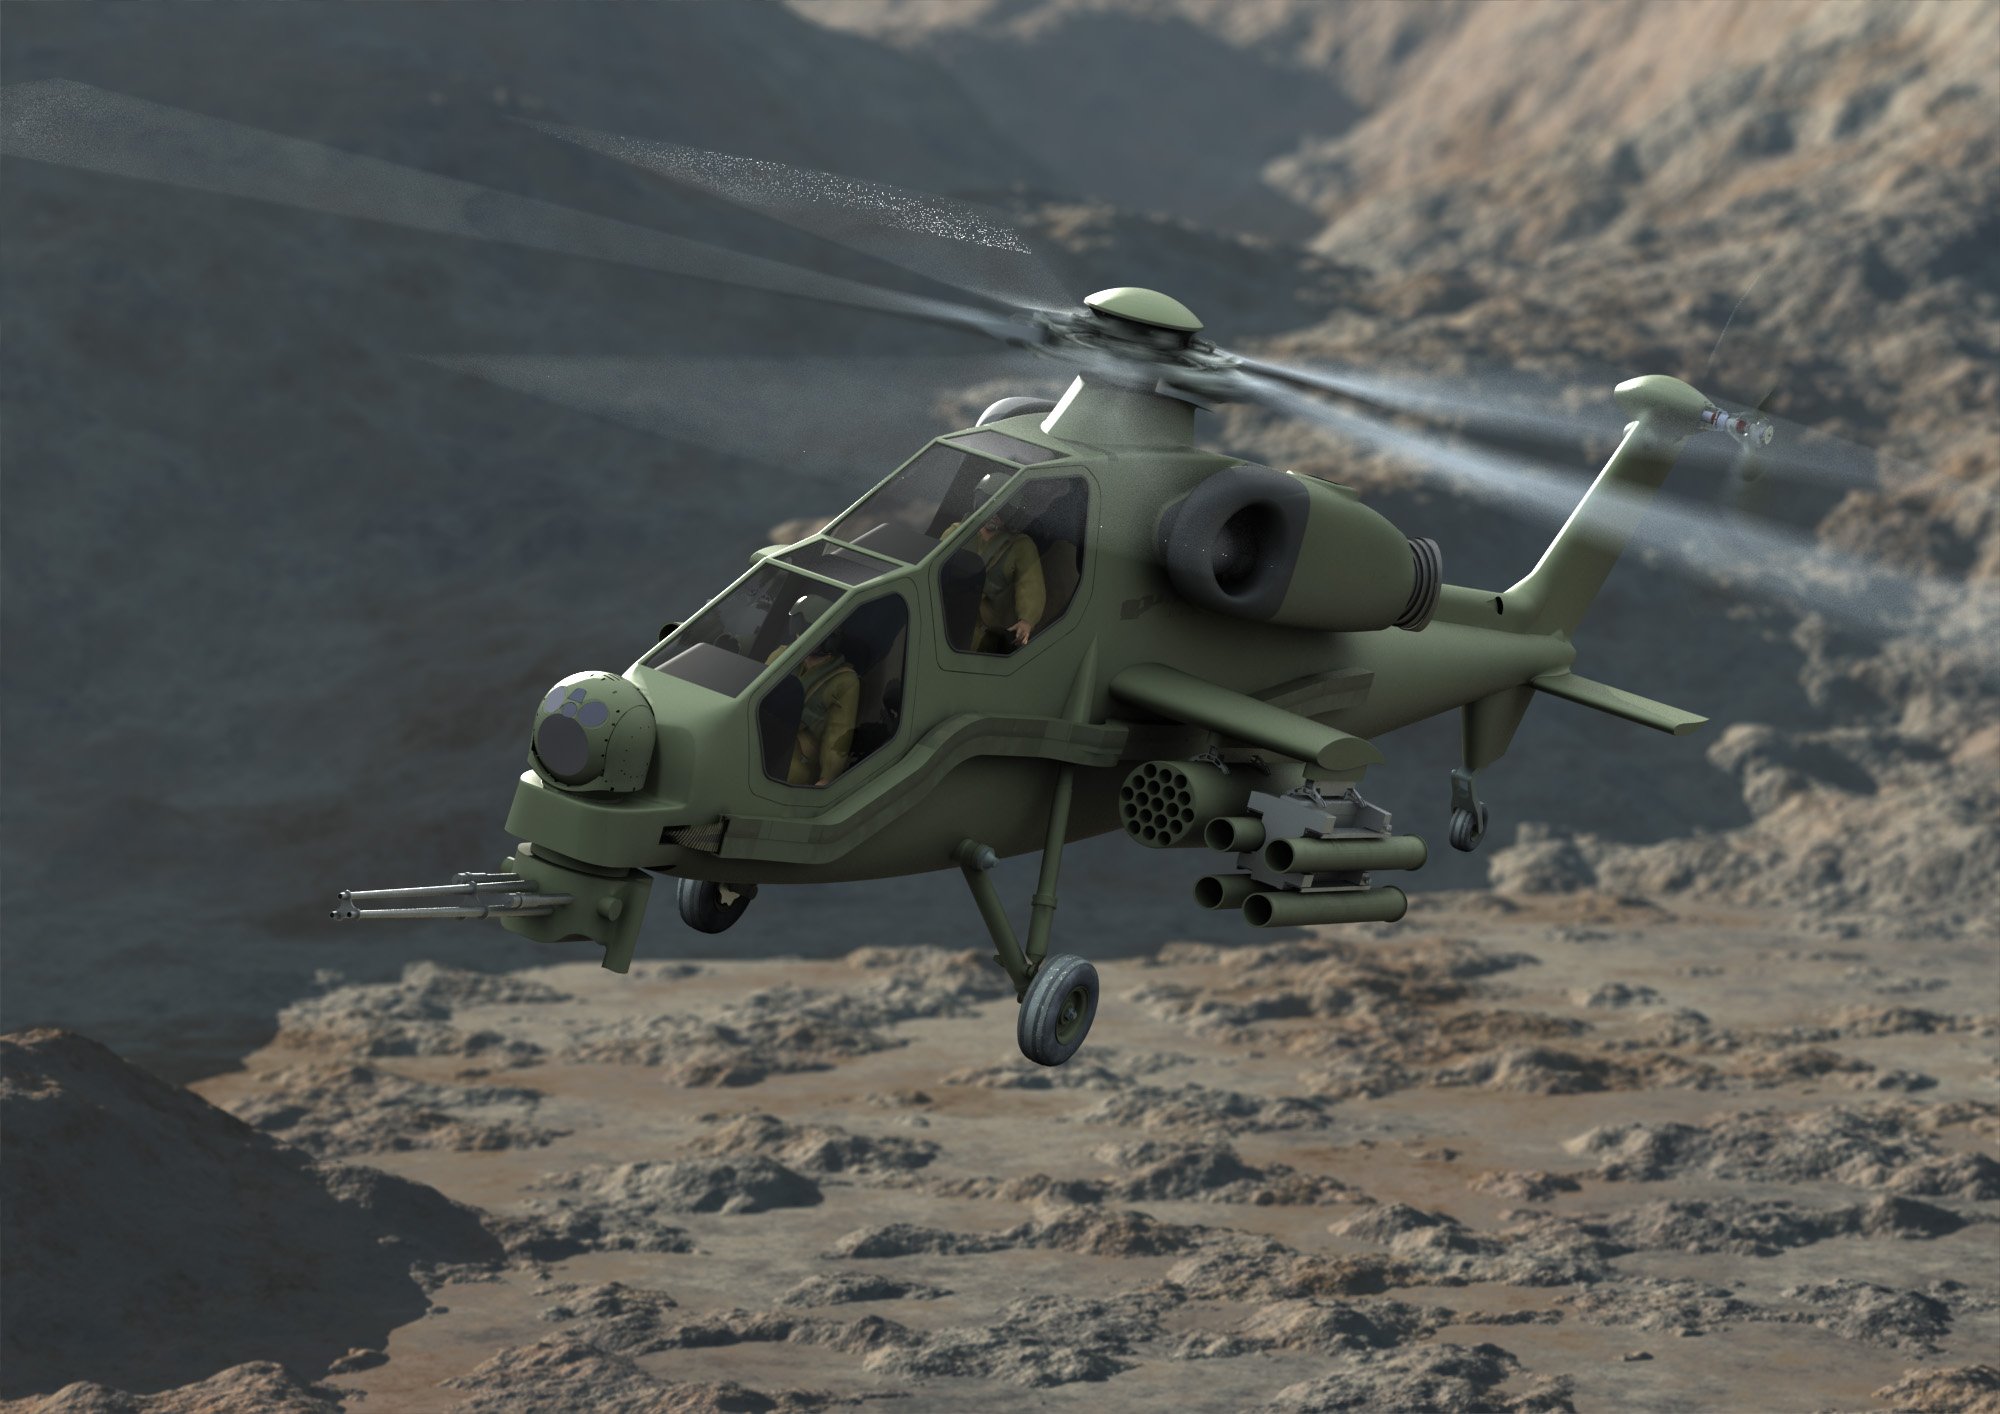 t129, Attack, Helicopter, Raid, Atak, Weapon, Aircraft, Military,  5 , Jpg Wallpaper